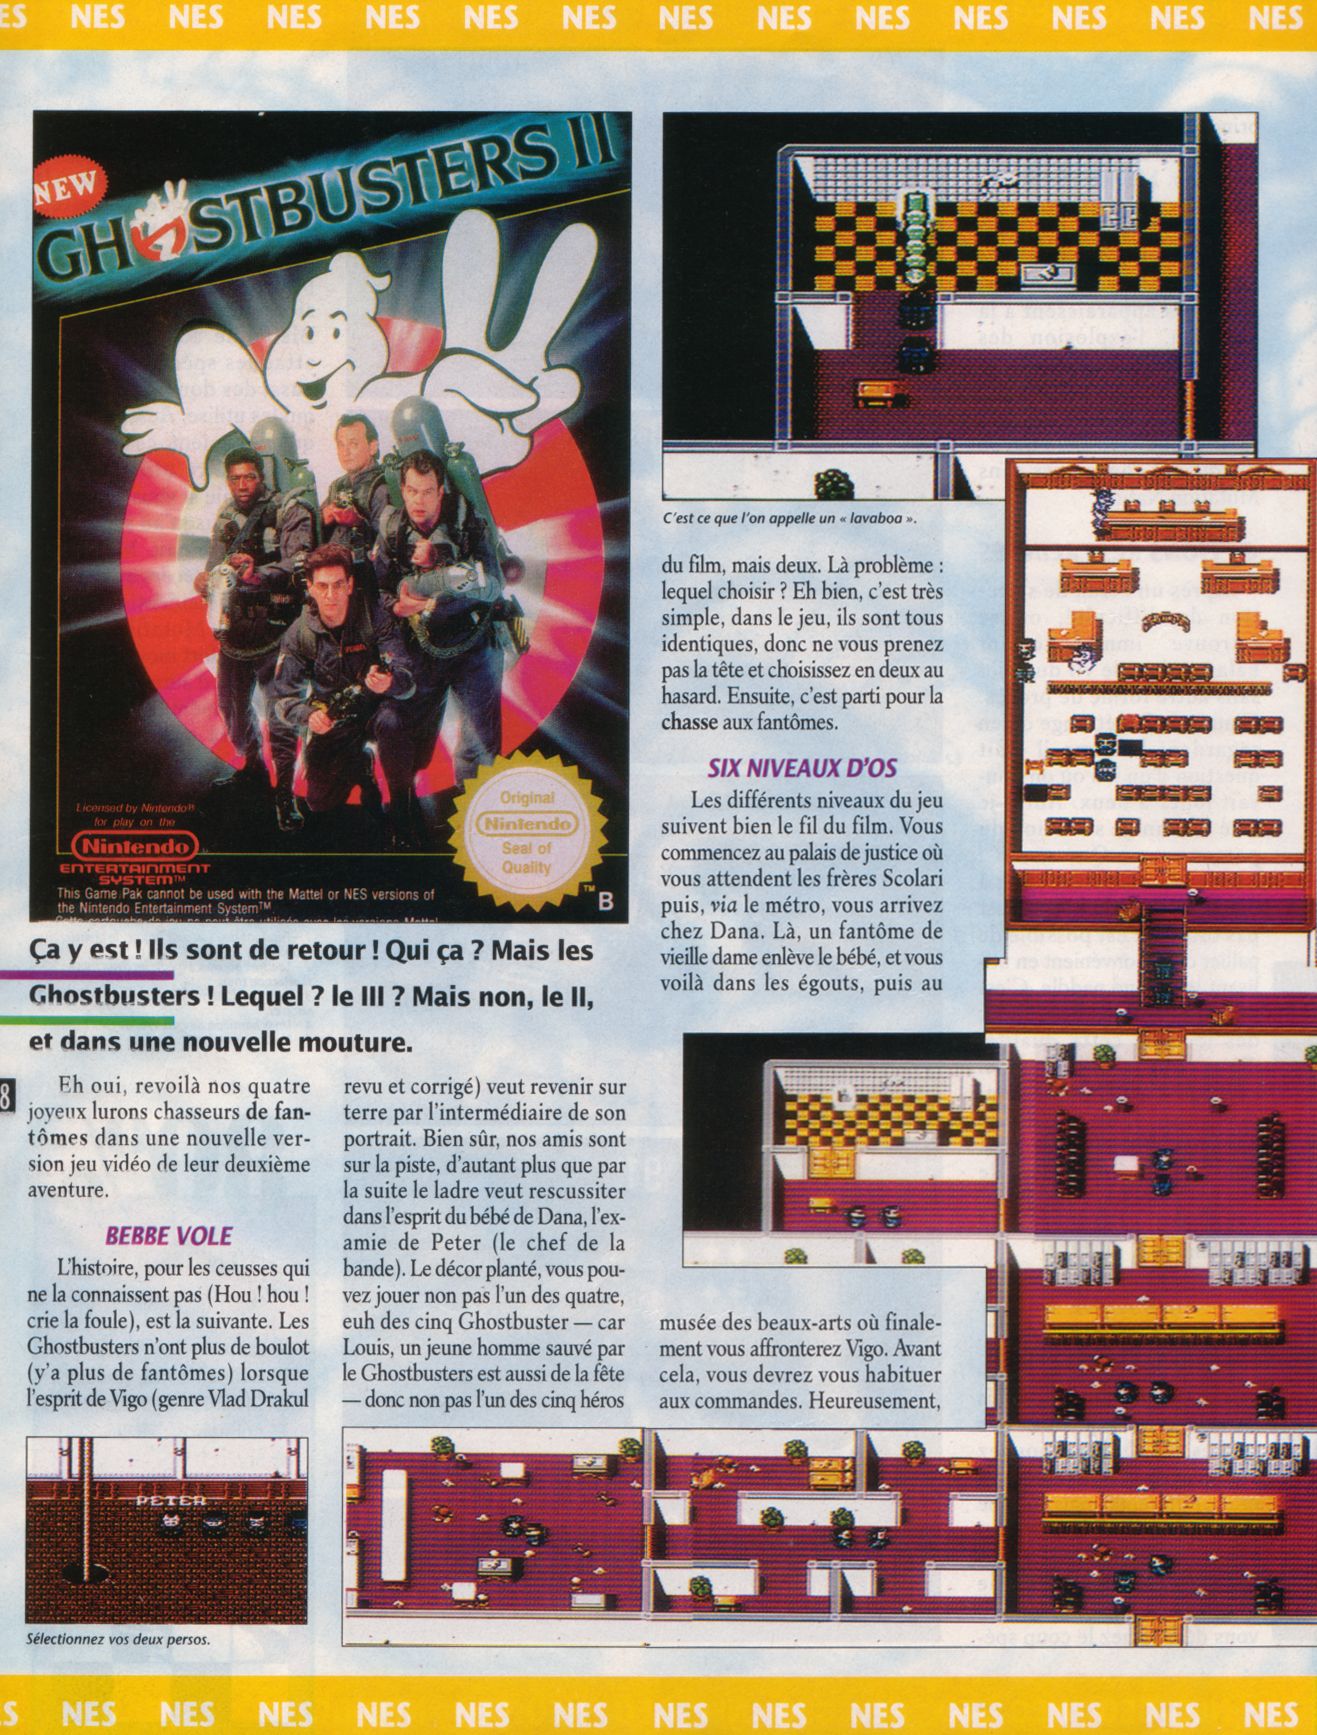 [TEST] New Ghosbusters II (Famicom) Player%20One%20020%20-%20Page%20078%20%281992-05%29